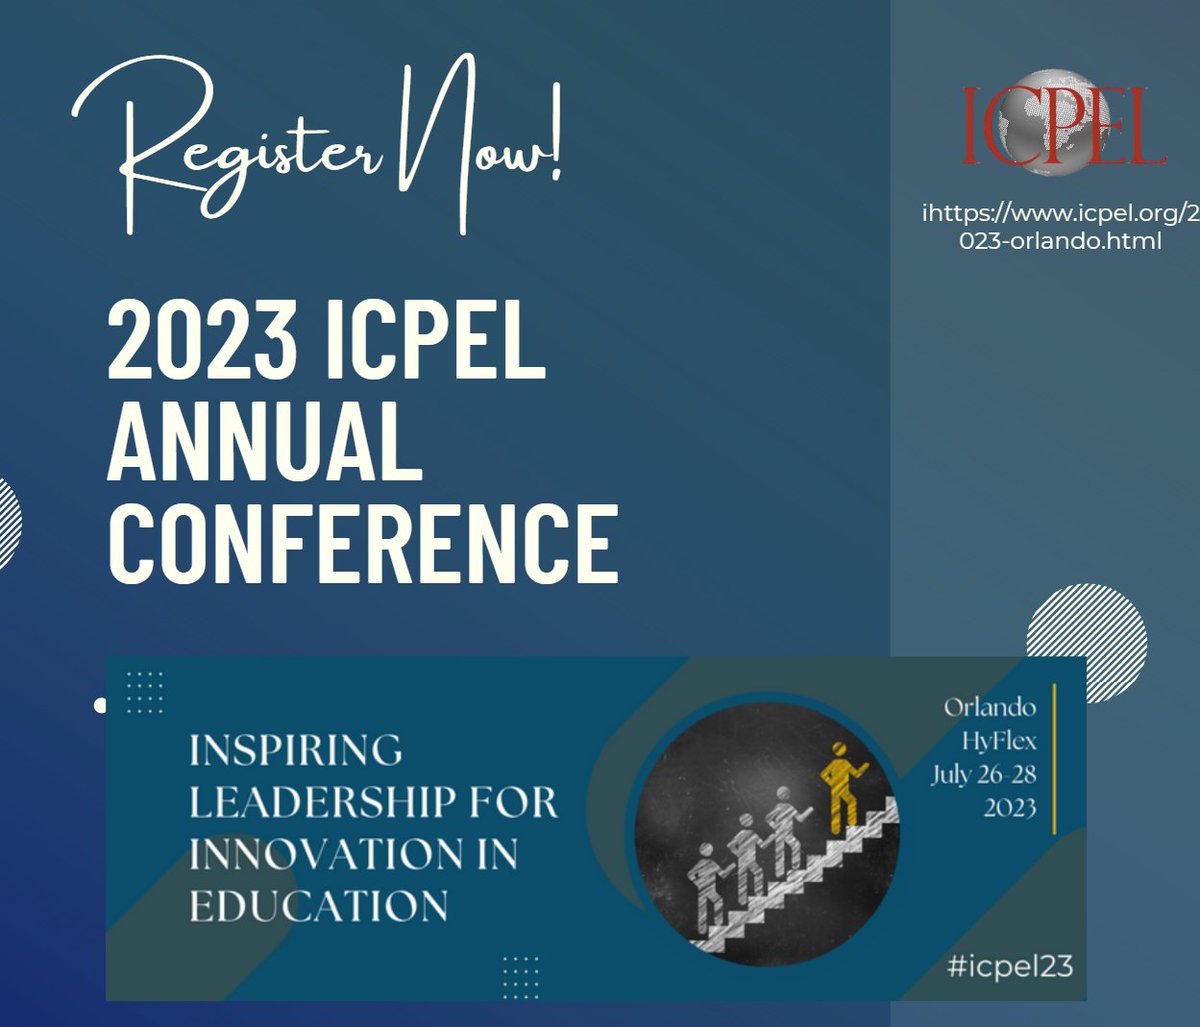 Registration for the 2023 ICPEL Annual Conference is now OPEN! If you are an educator who would like to discuss innovation in education, this is the conference for you! icpel.org/2023-orlando.h… #icpel23 #elwb #edleadership #highereducation #educationalleadership #conference2023